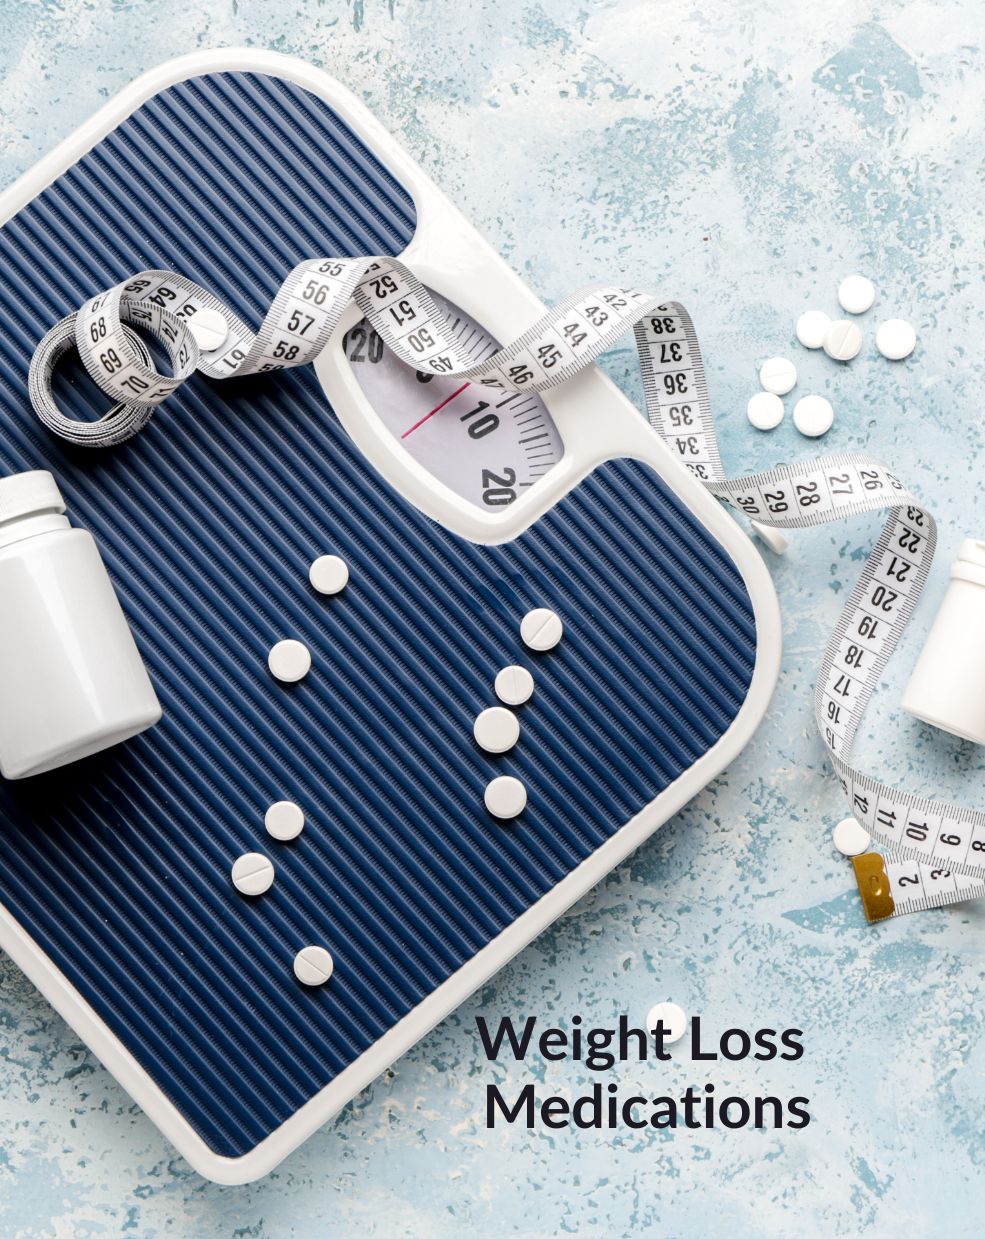 Weight Loss Made Easy: Nutrition, Lifestyle Tips, and  FDA-Approved Medications